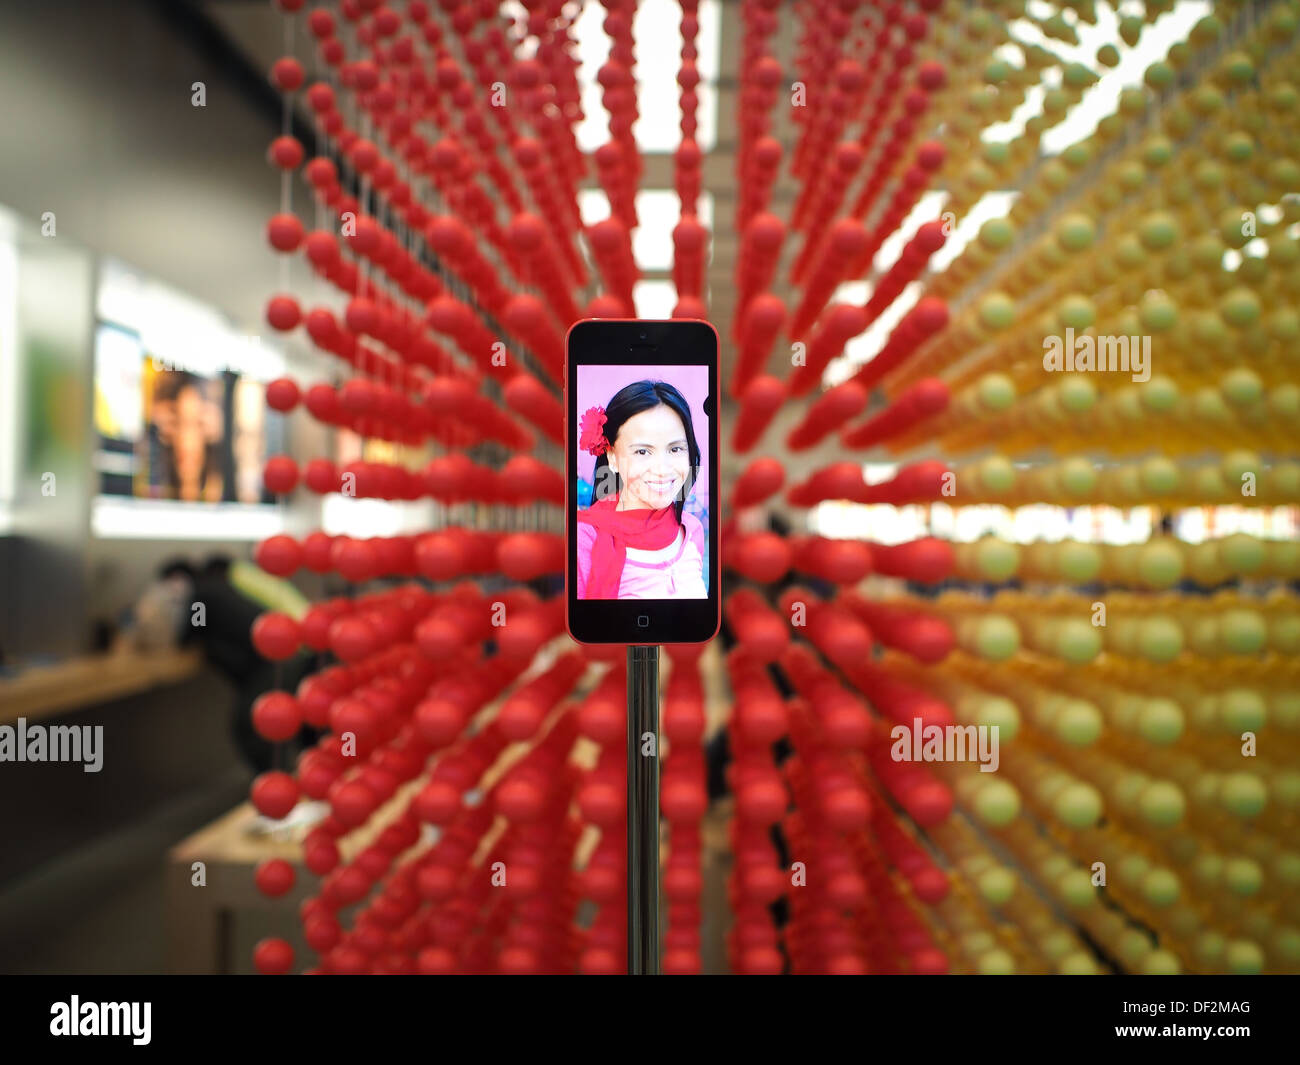 New iPhone launch in Canada Stock Photo Alamy